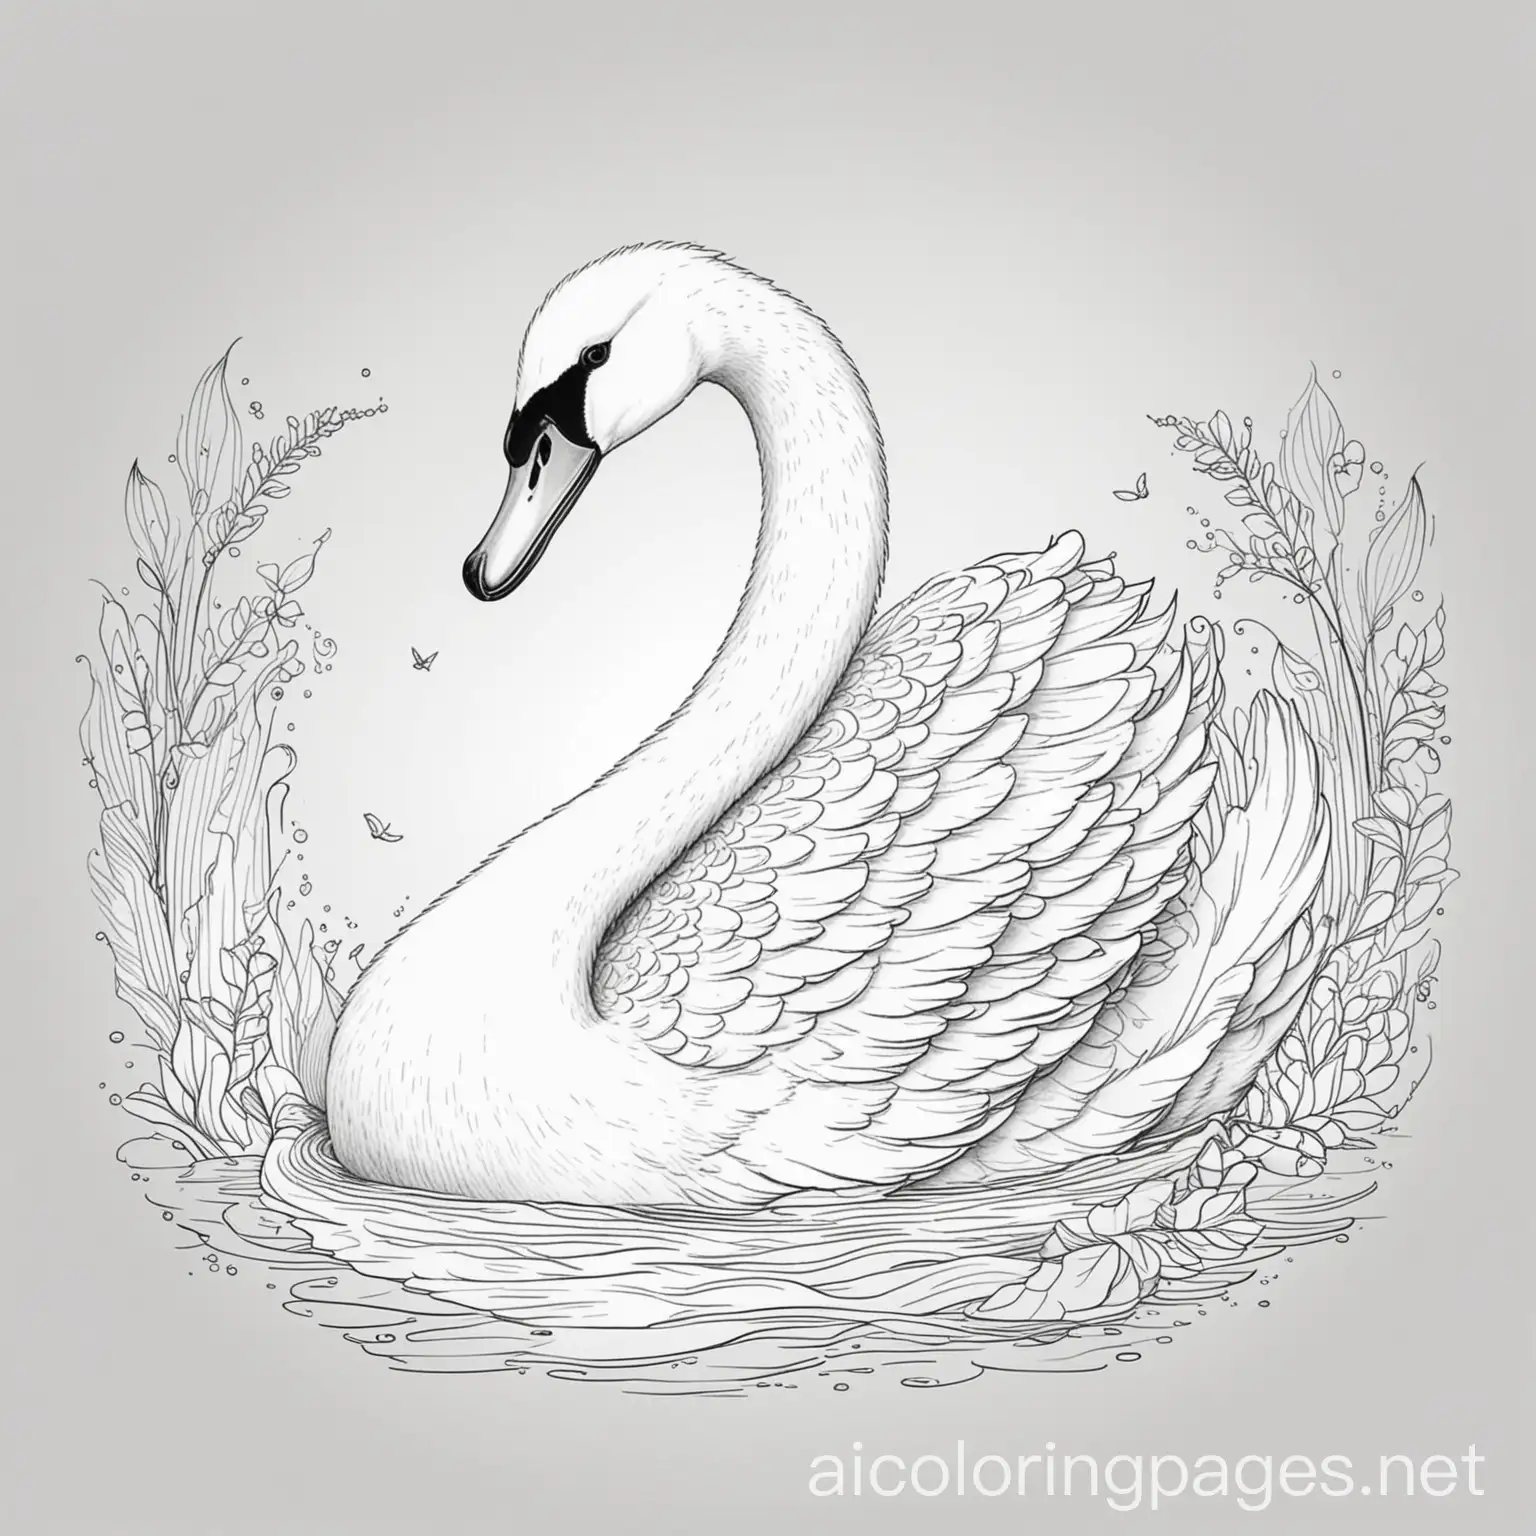 Coloring-Page-of-a-Graceful-Swan-Black-and-White-Line-Art